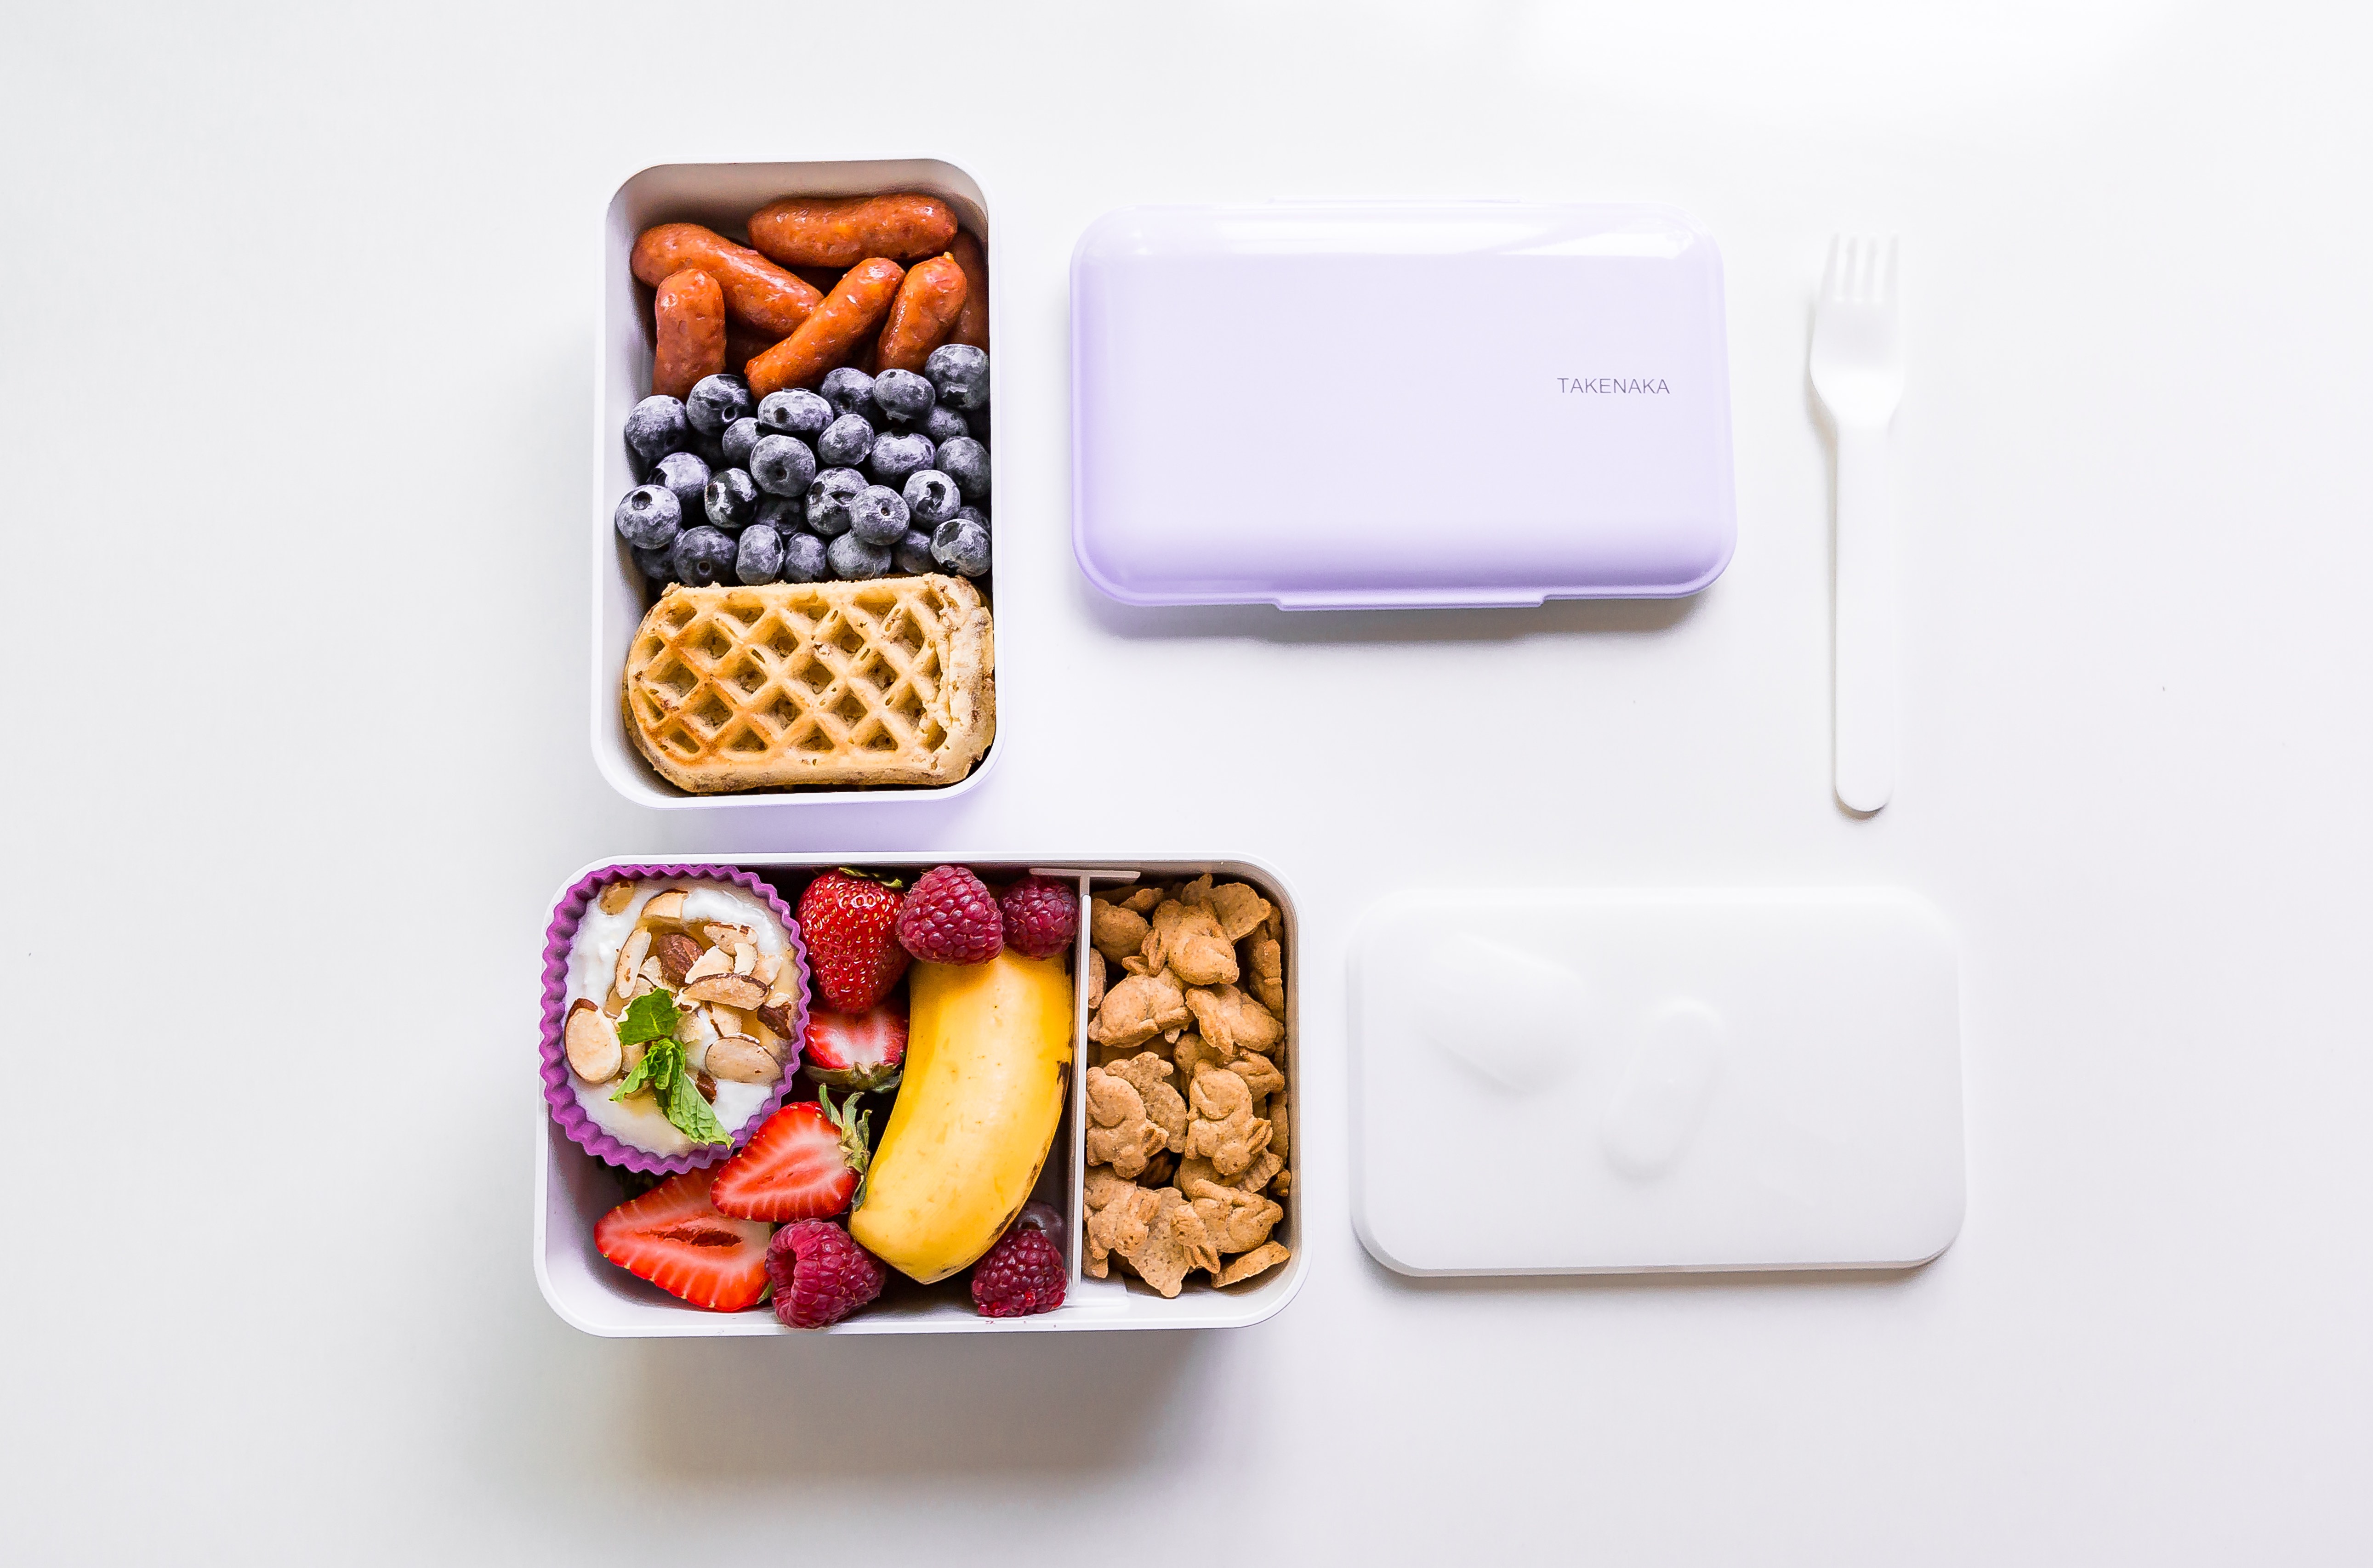 https://theinspiredhome.com/wp-content/uploads/2023/02/2017-09-04-Back-to-School-Bento-BREAKFAST-BOX-1a-resize.jpg